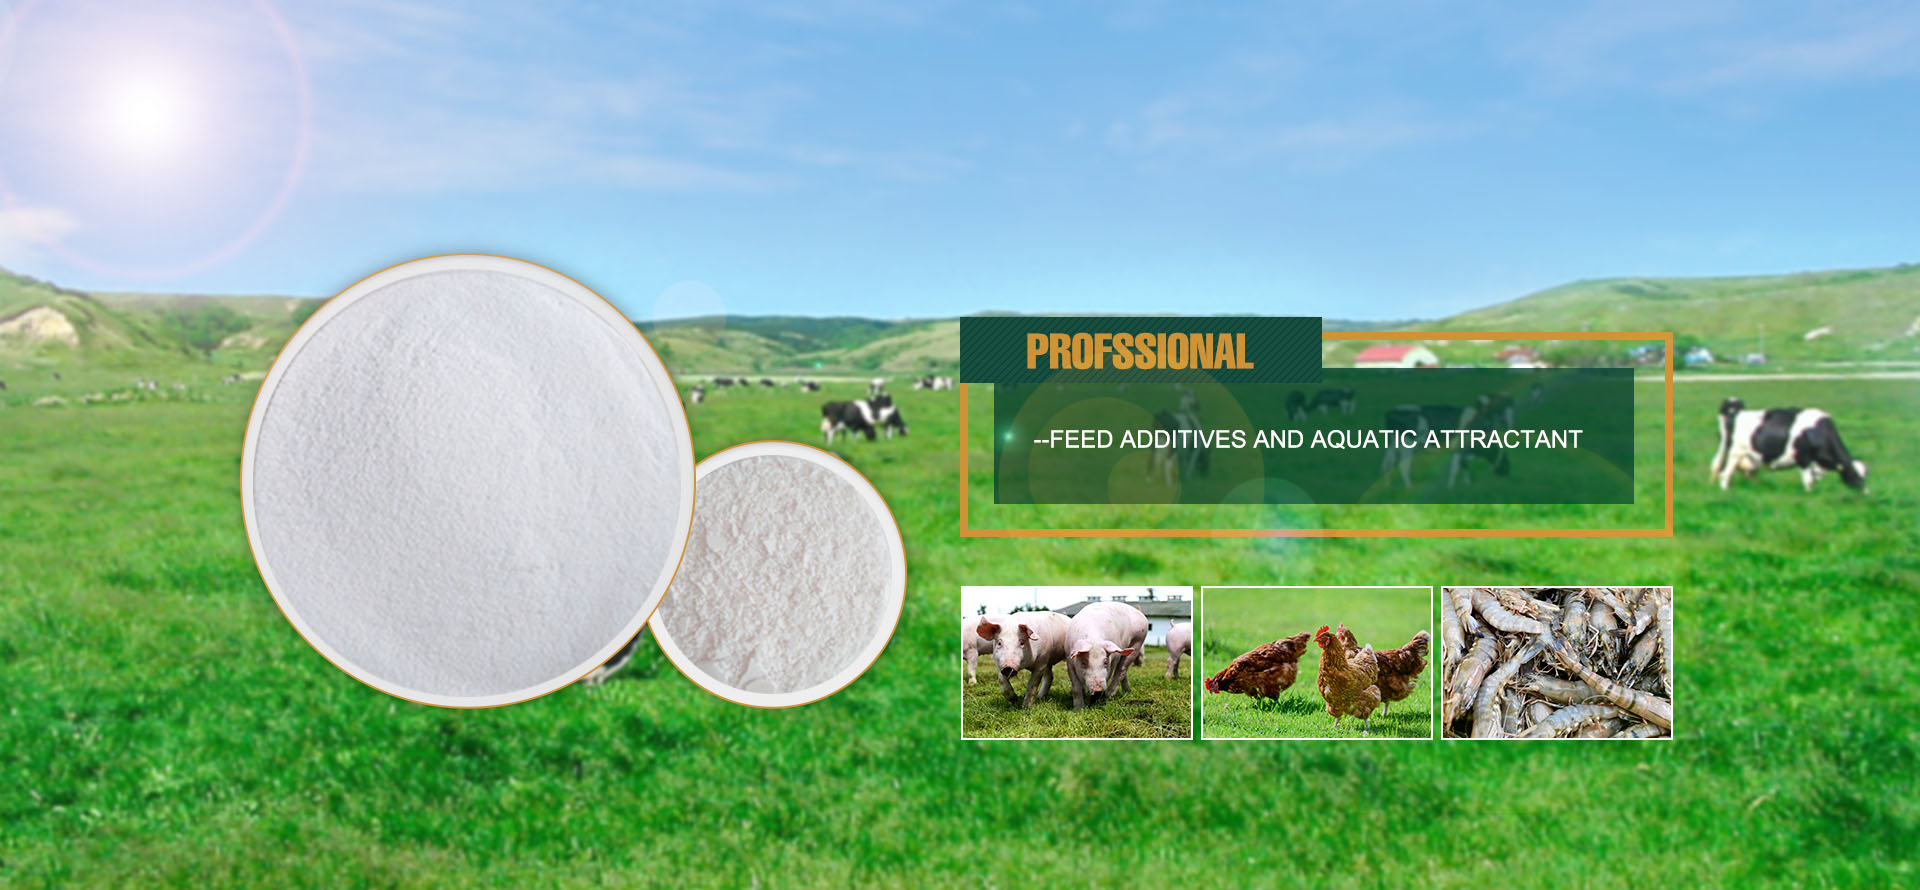 FEED ADDITIVES AND AQUATIC ATTRACTANT